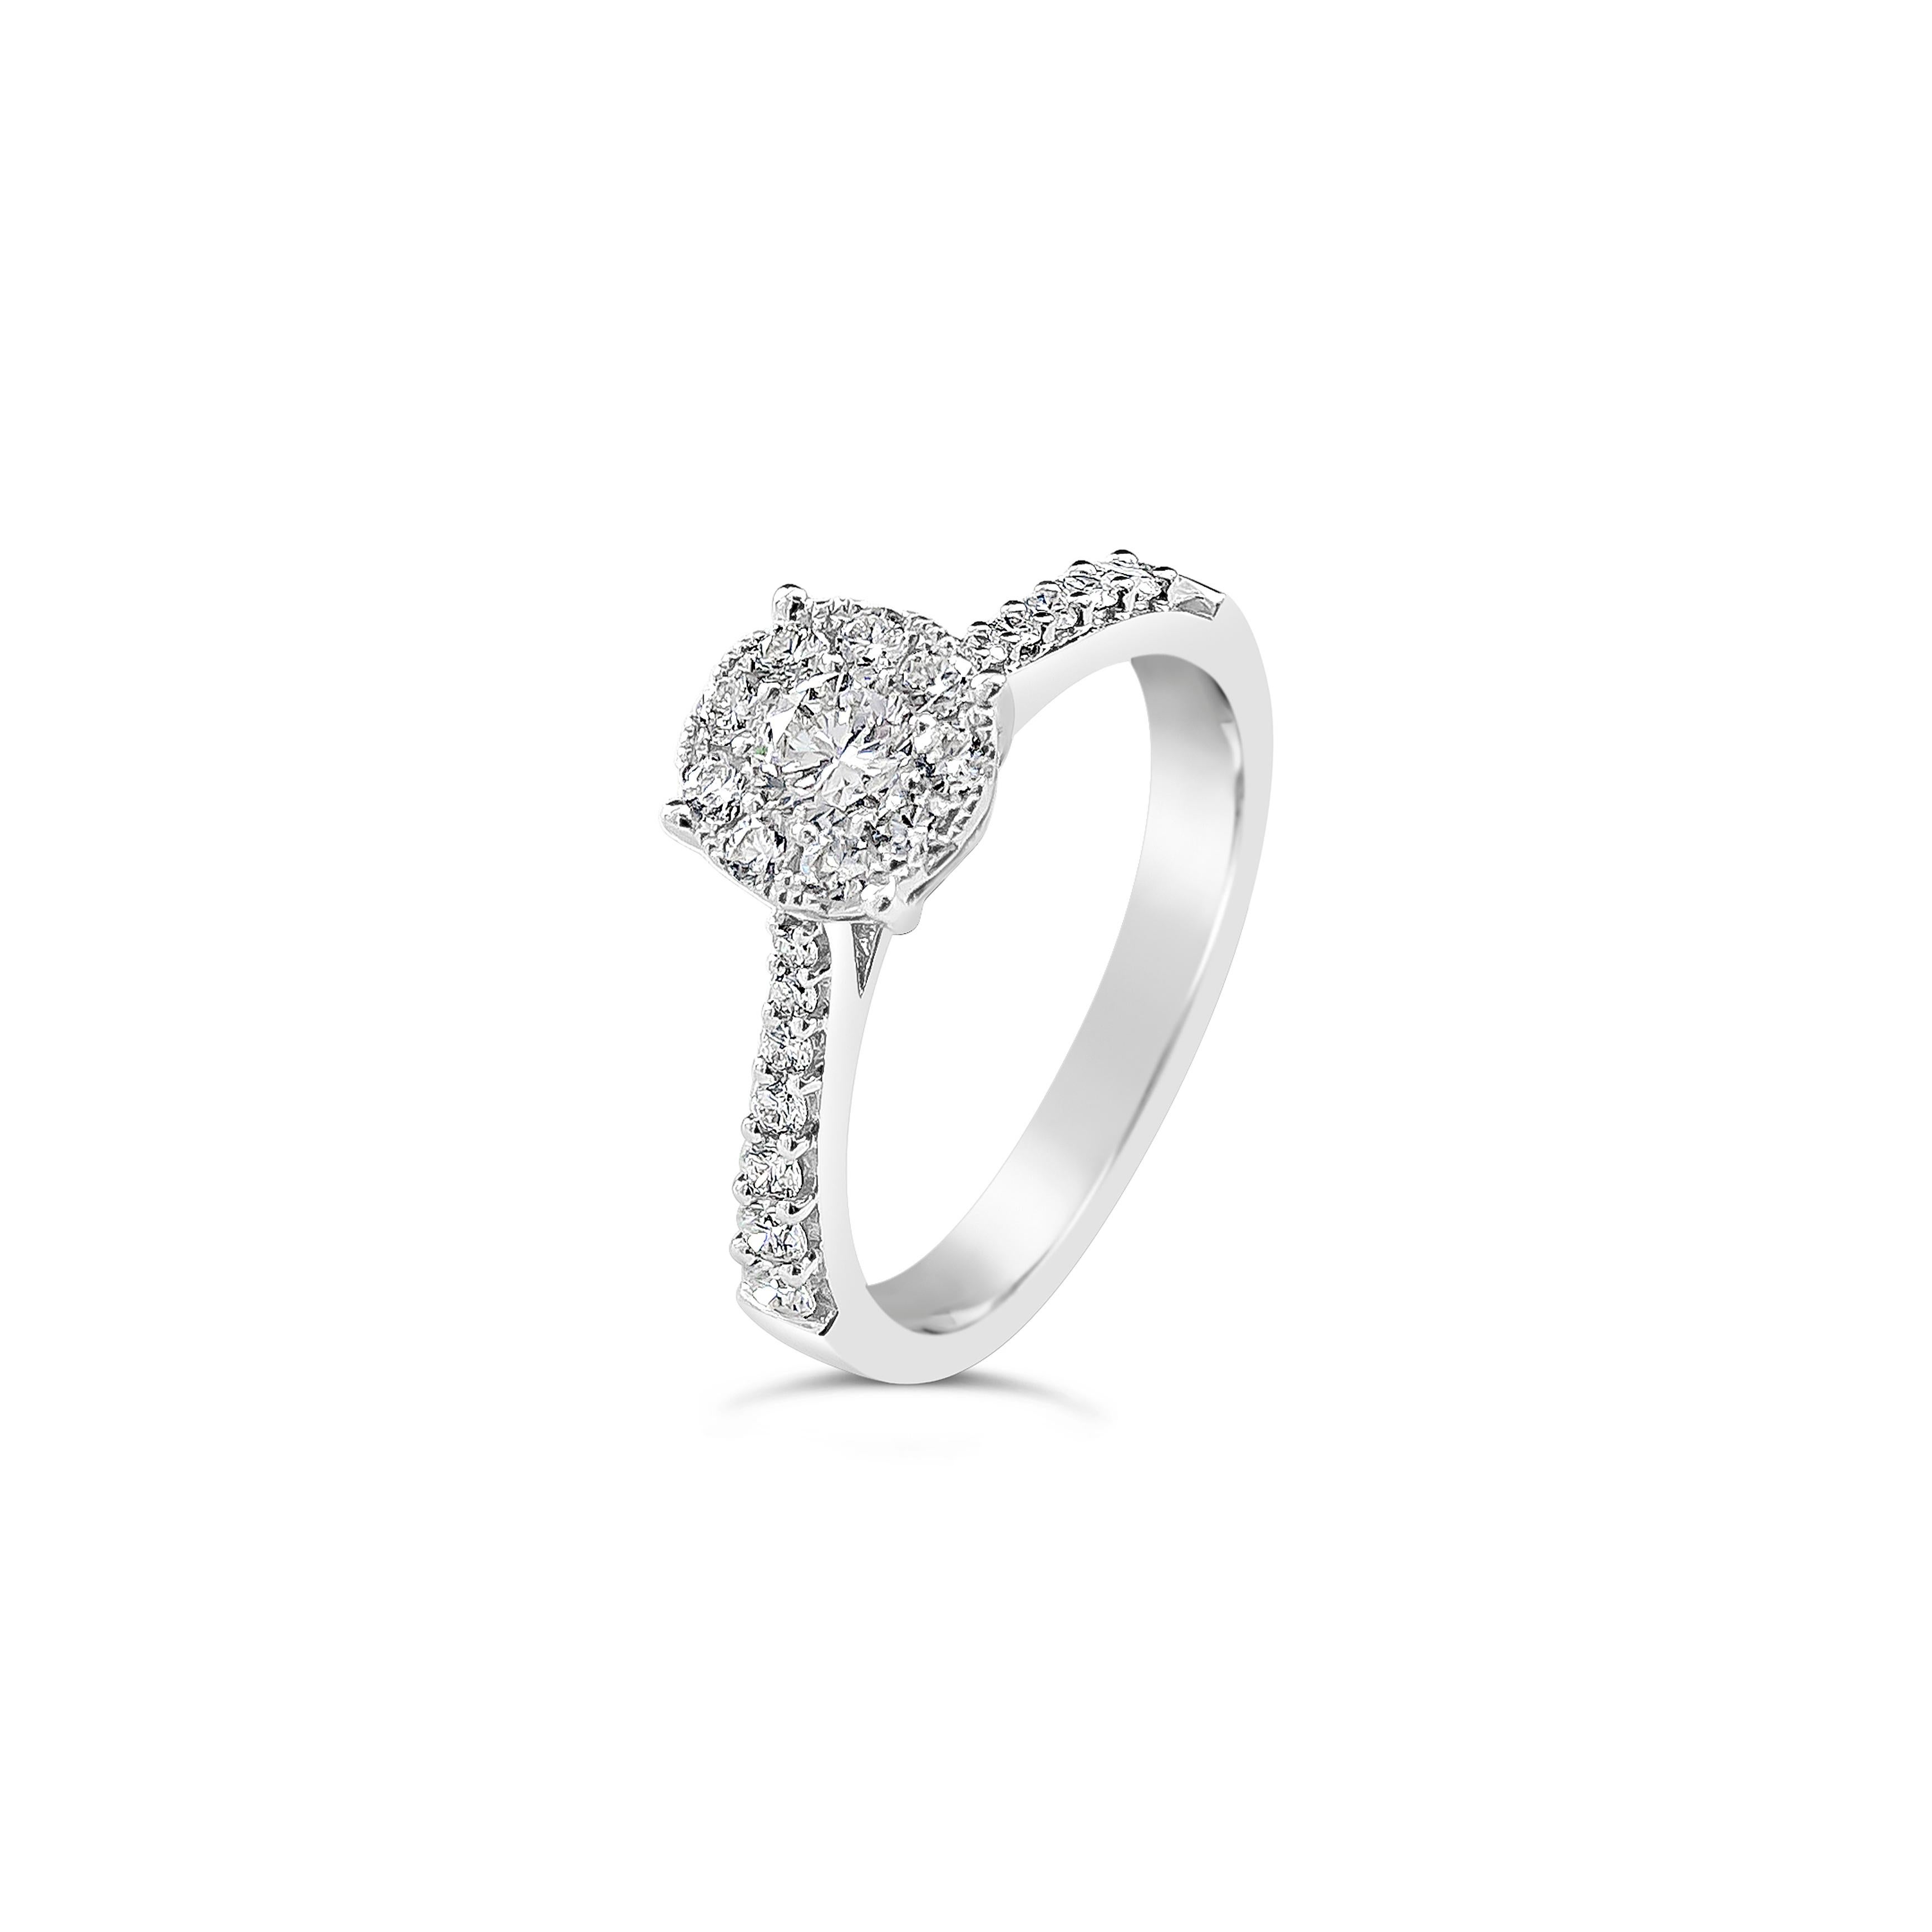 Features a center stone weighing 0.26 carats surrounded by a cluster of round brilliant diamonds set in a seamless design, set in a tapered band accented with diamonds. Accents round diamonds weighs 0.48 carats total. Made in 18k white gold, size